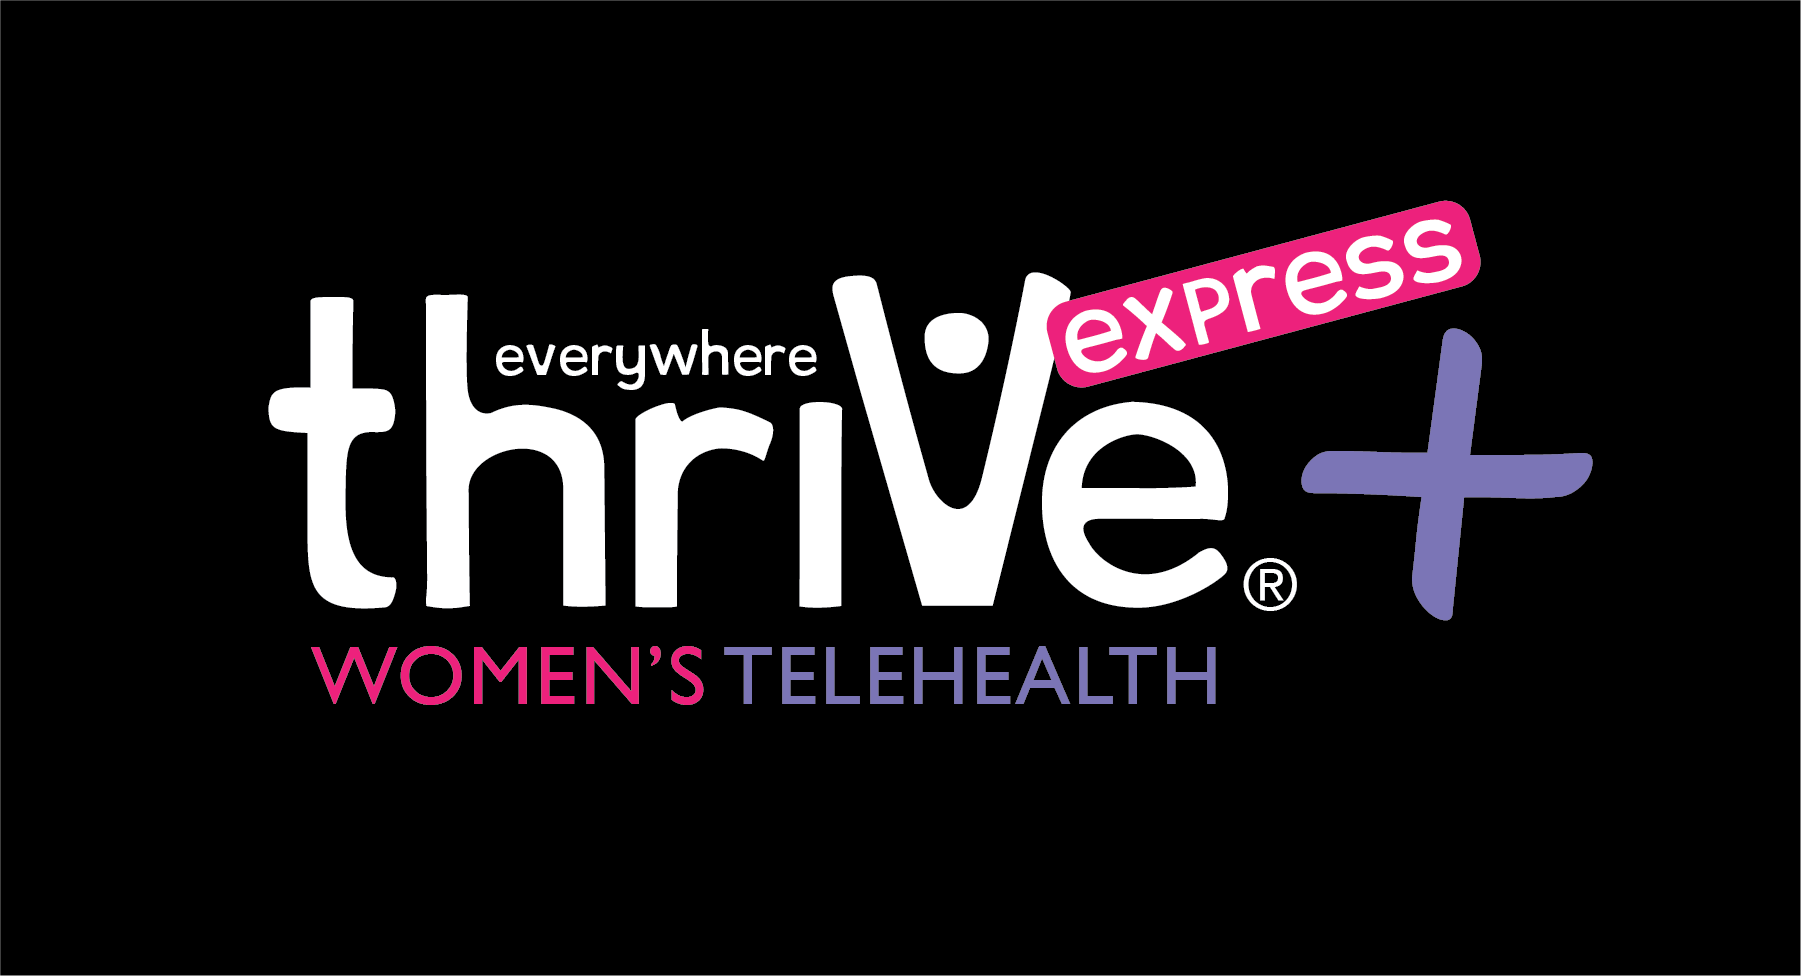 ThriVe Express Women's Healthcare